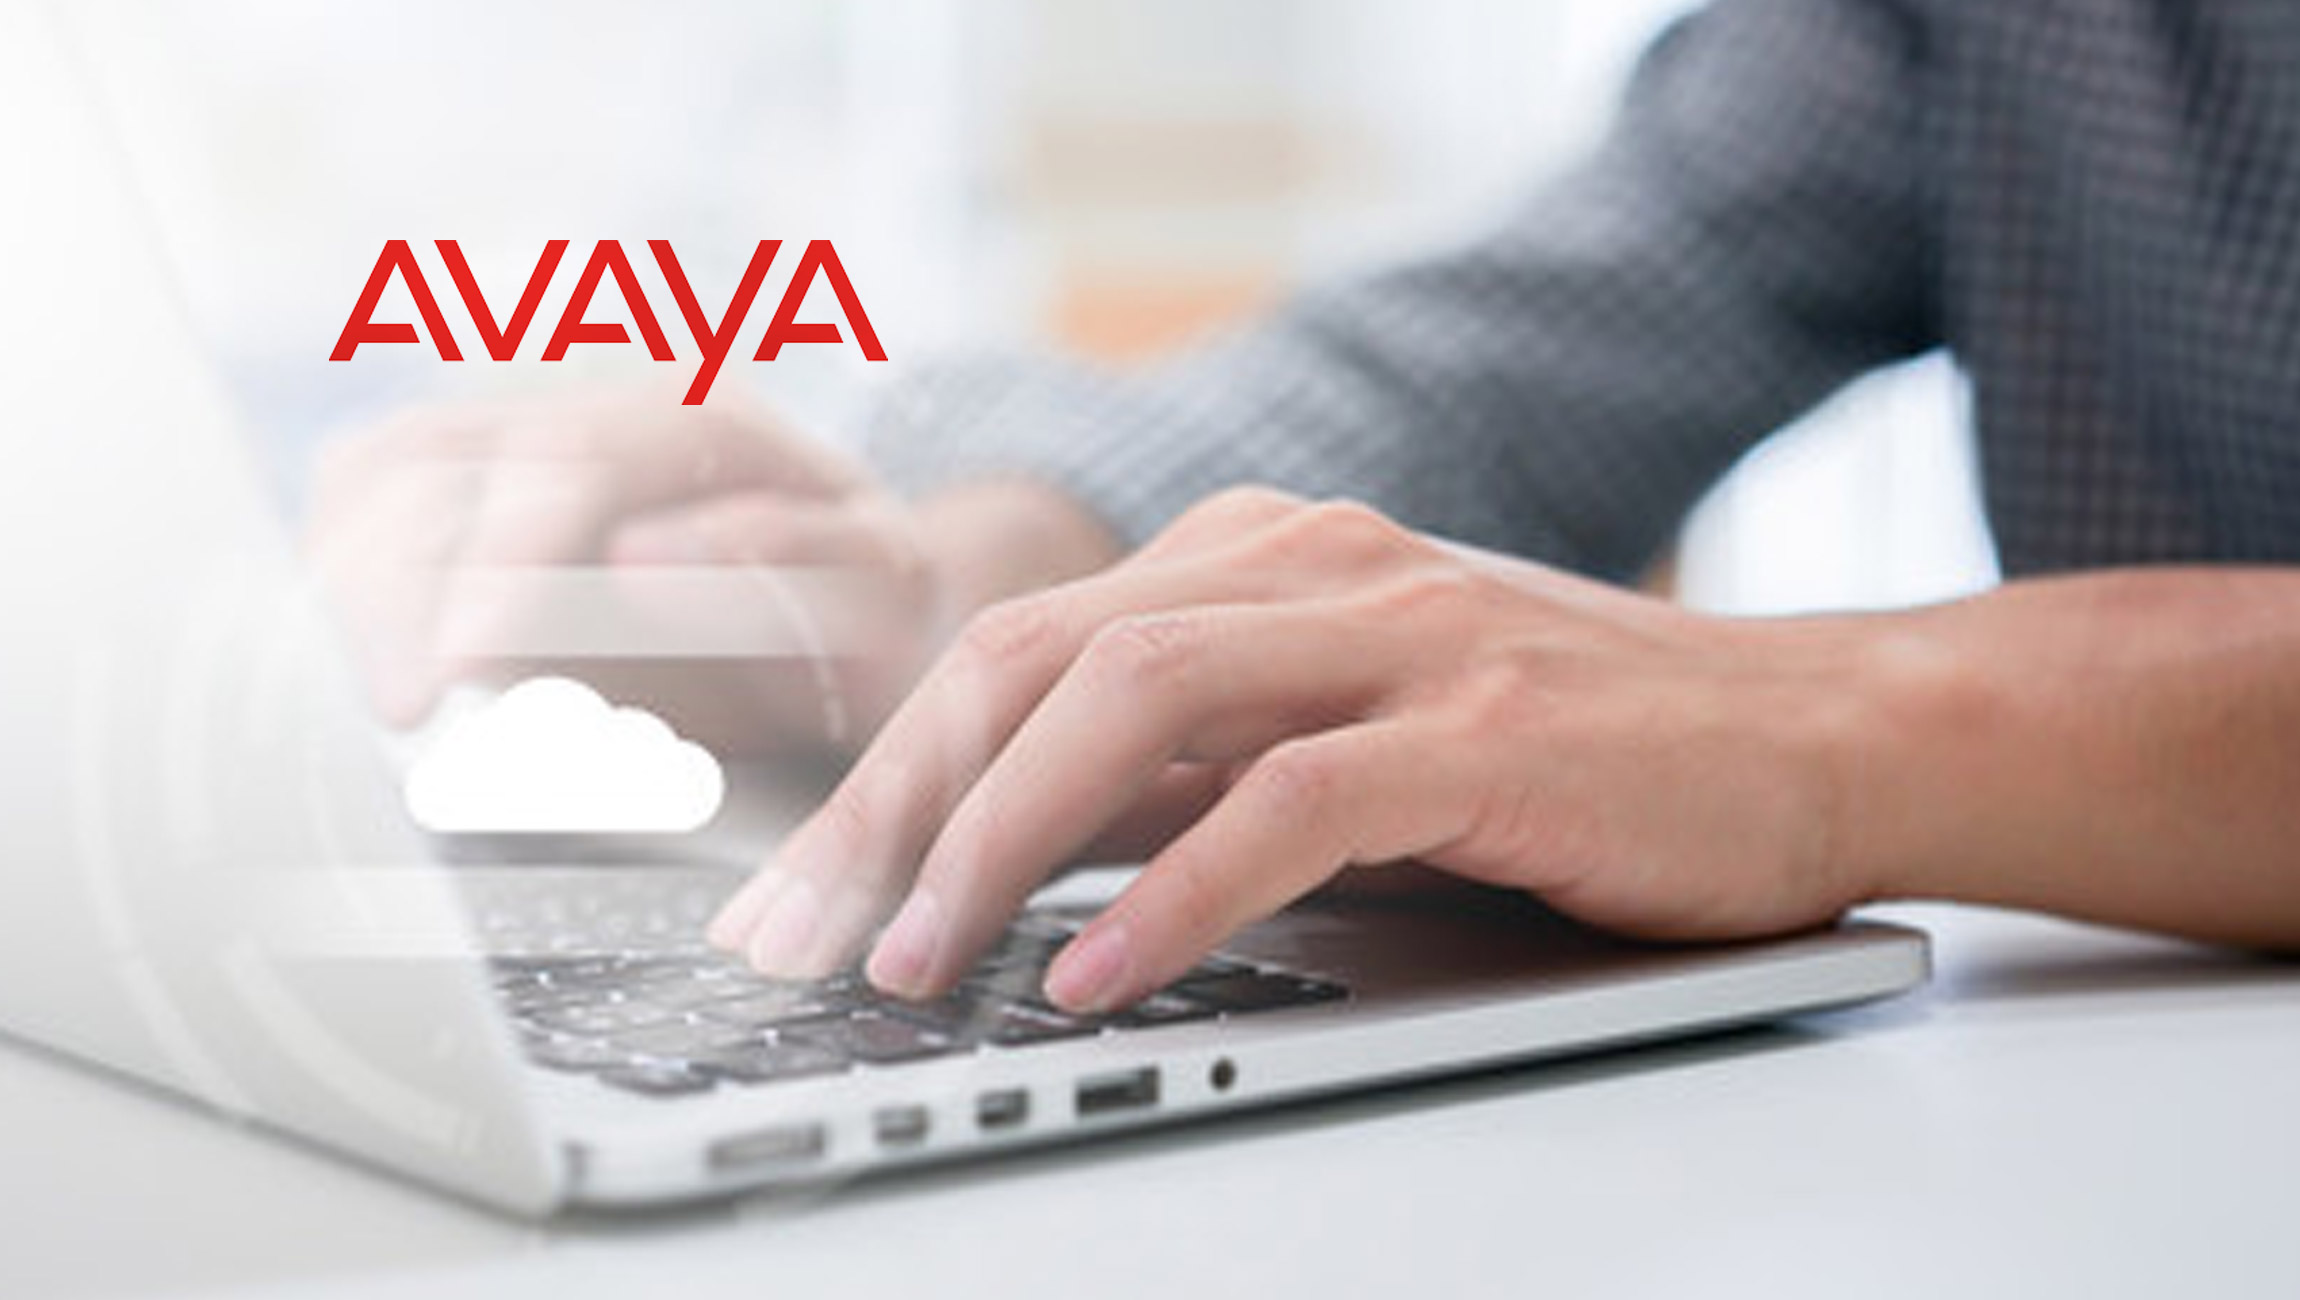 Avaya Recognizes Outstanding Canadian Partners Driving Customer Success, Digital Transformation and Cloud Communications